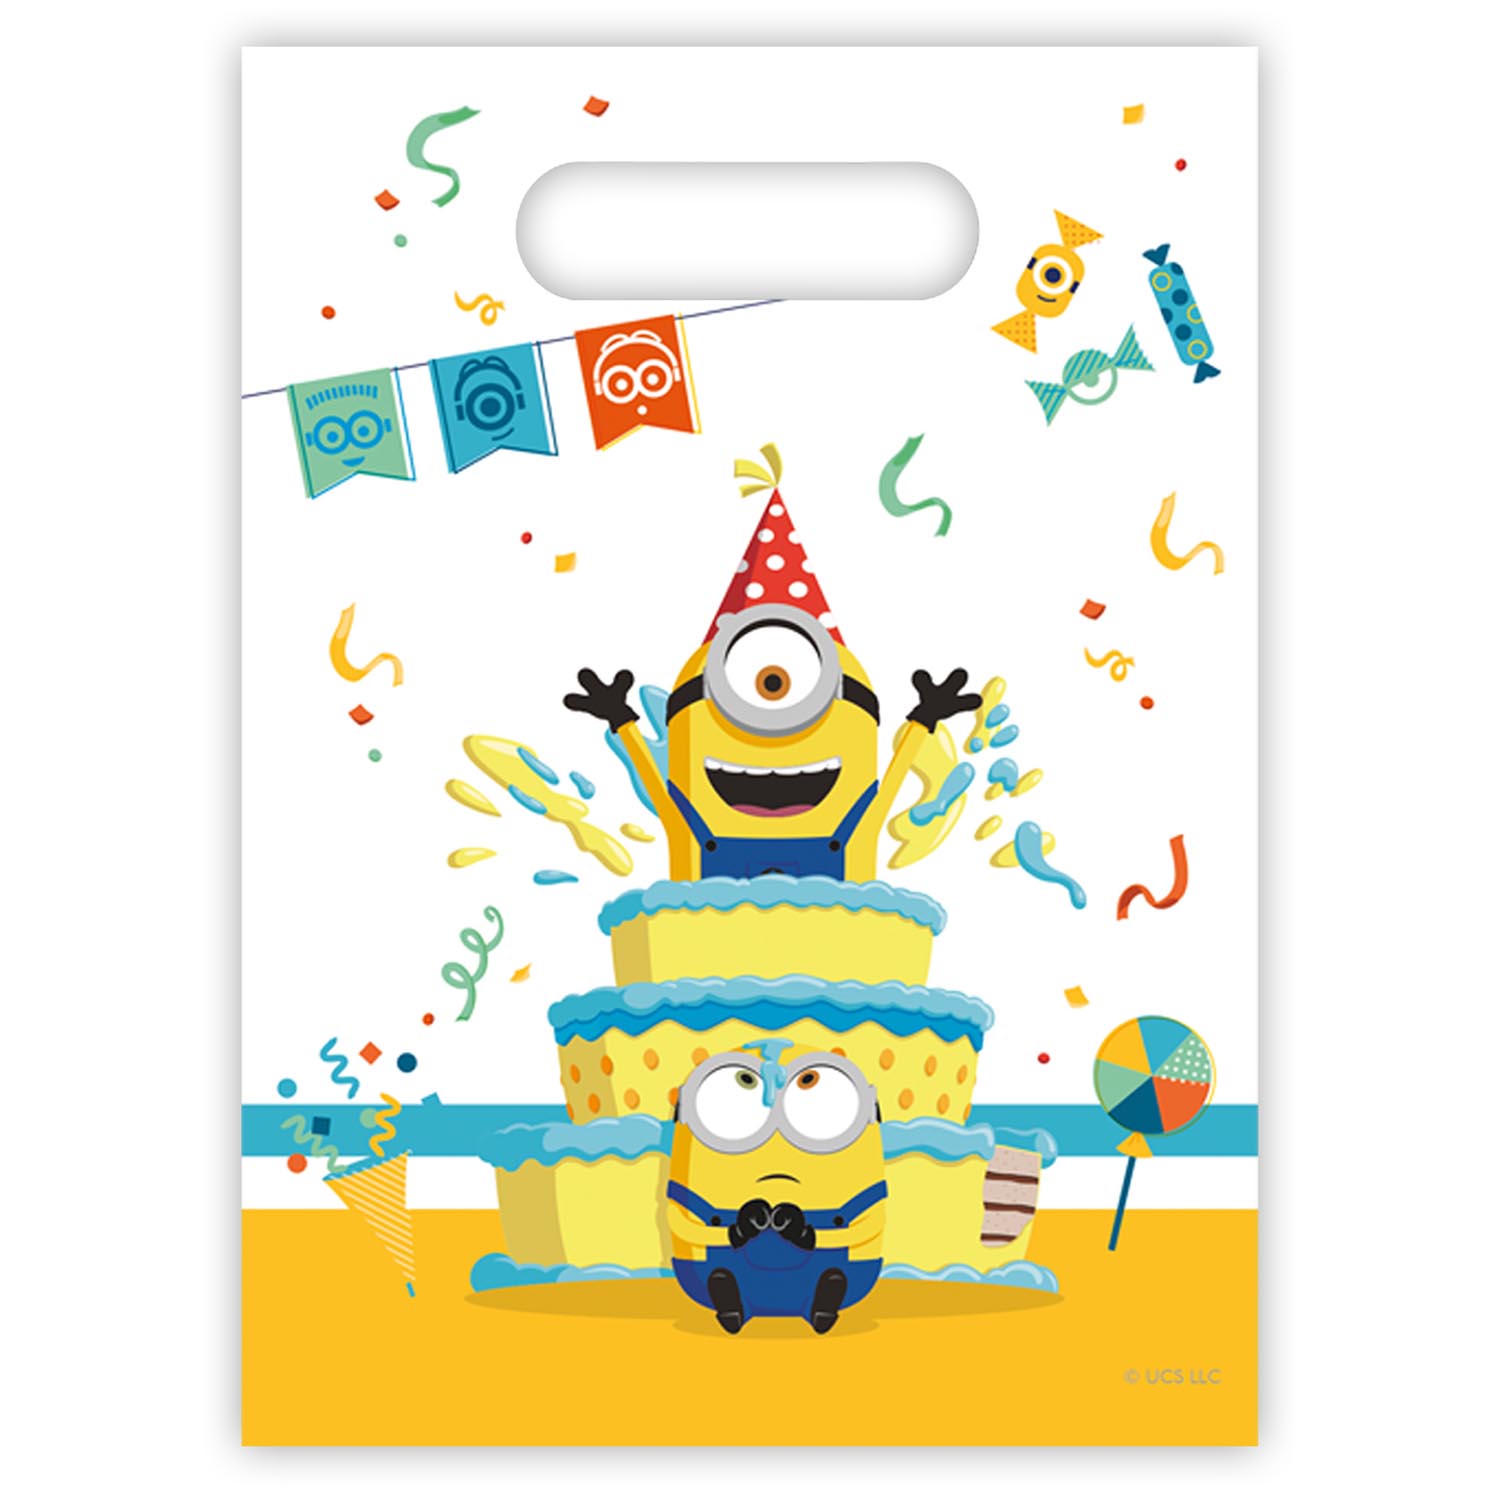 Minions: The Rise of Gru Party Tableware & Decorations Bundle - 16 Guests